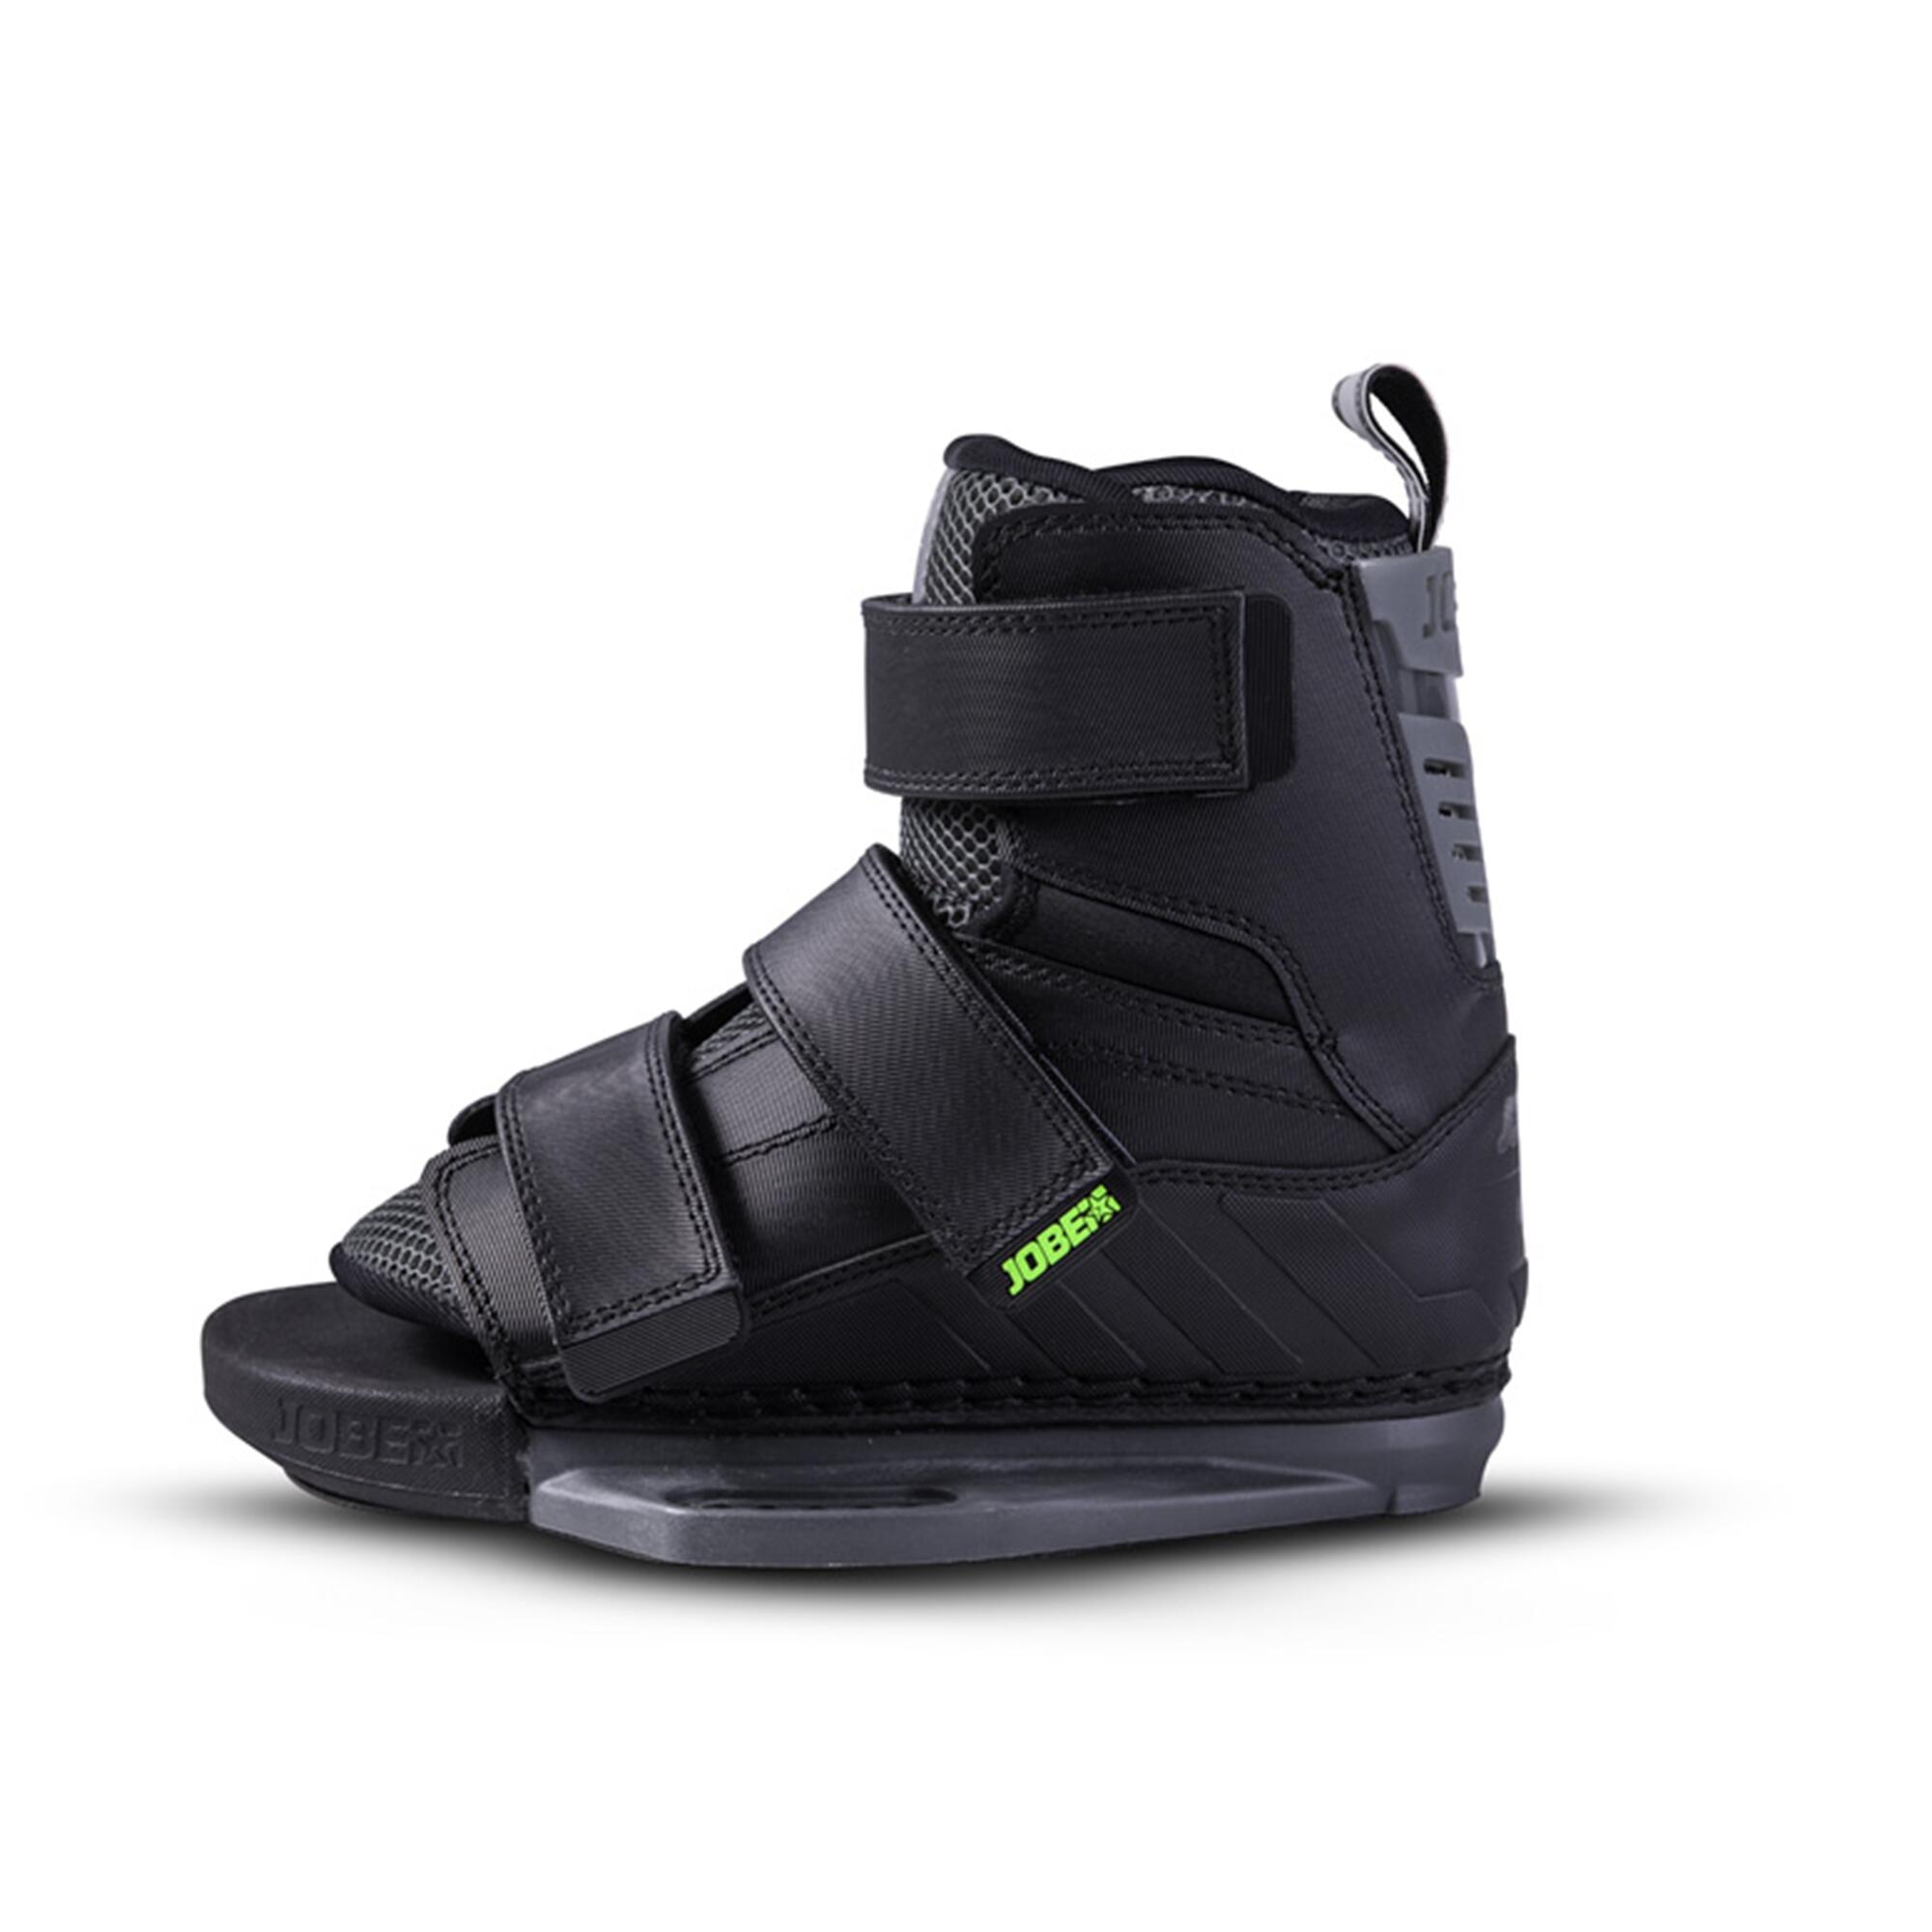 Boots WAKEBOARD Boots imagine 2022